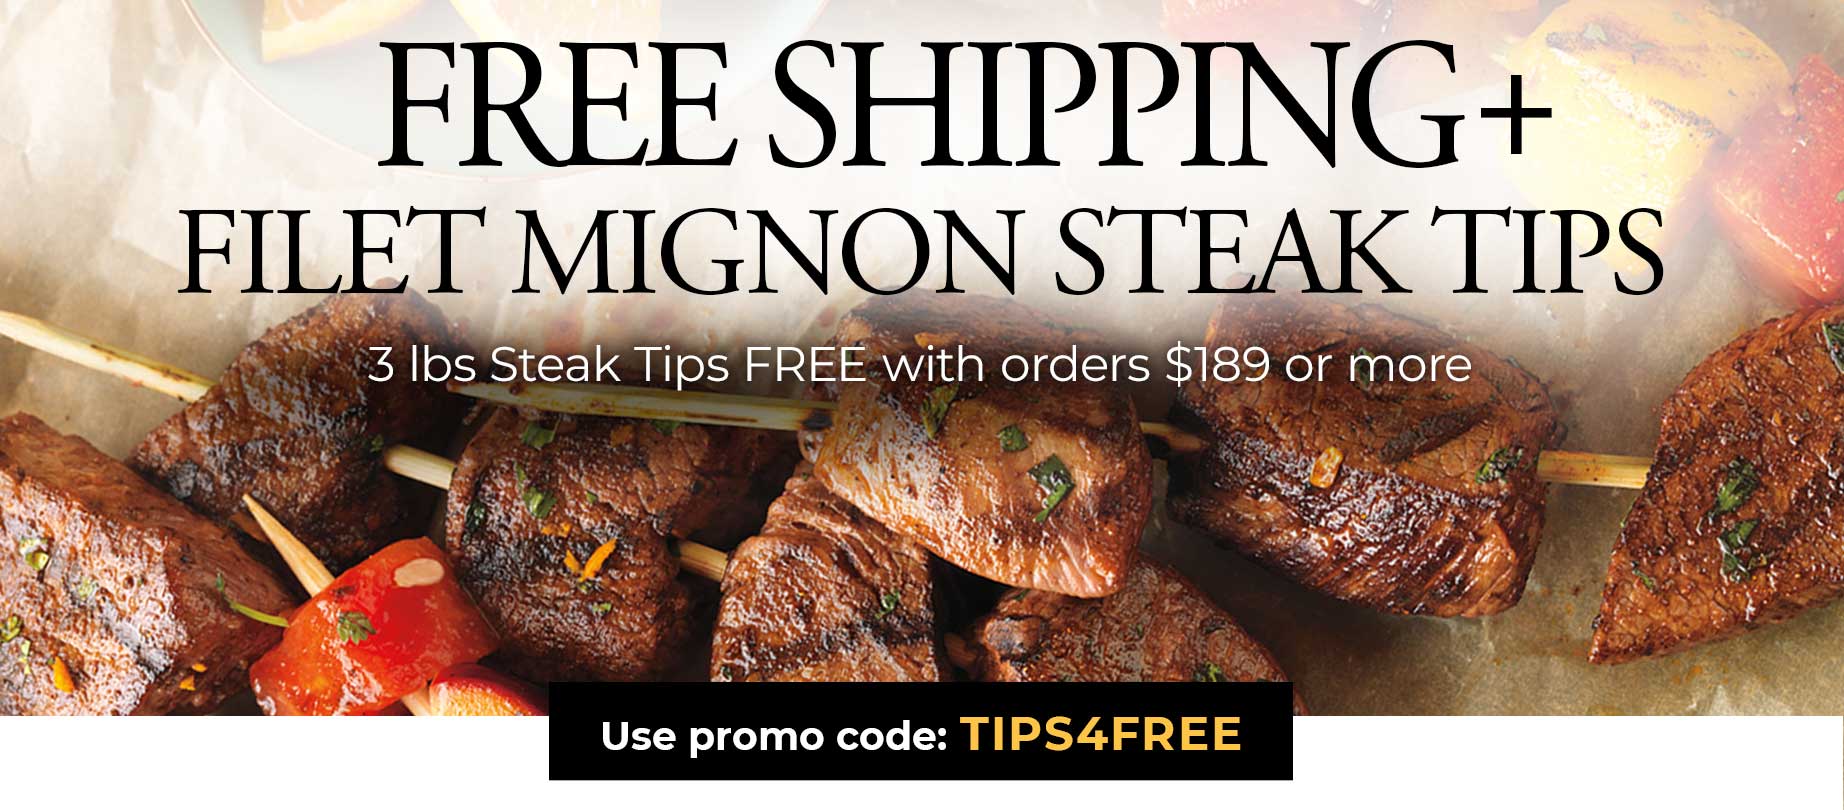 Free Shipping plus 3 lbs Filet Mignon Steak Tips with orders $189+ Use Promo Code TIPS4FREE